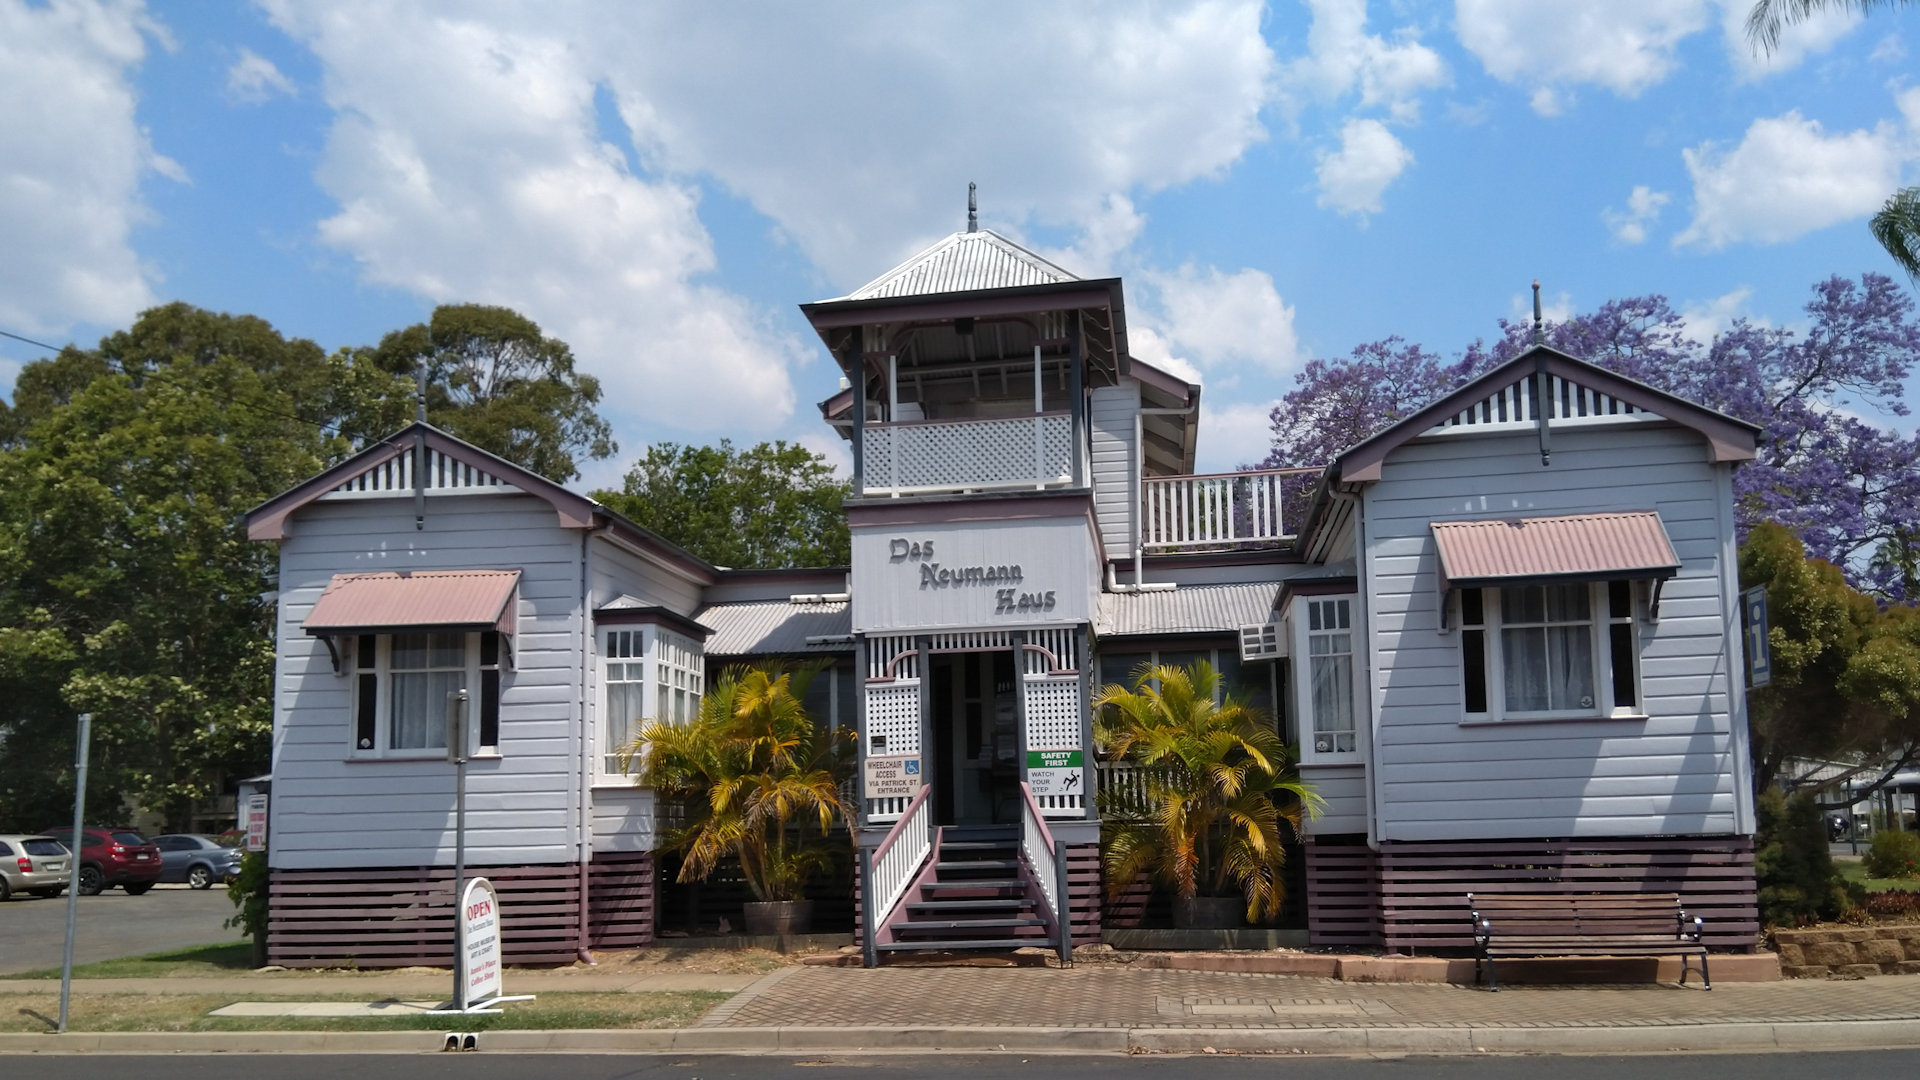 Front of the Das Neumann Haus Museum in Laidley